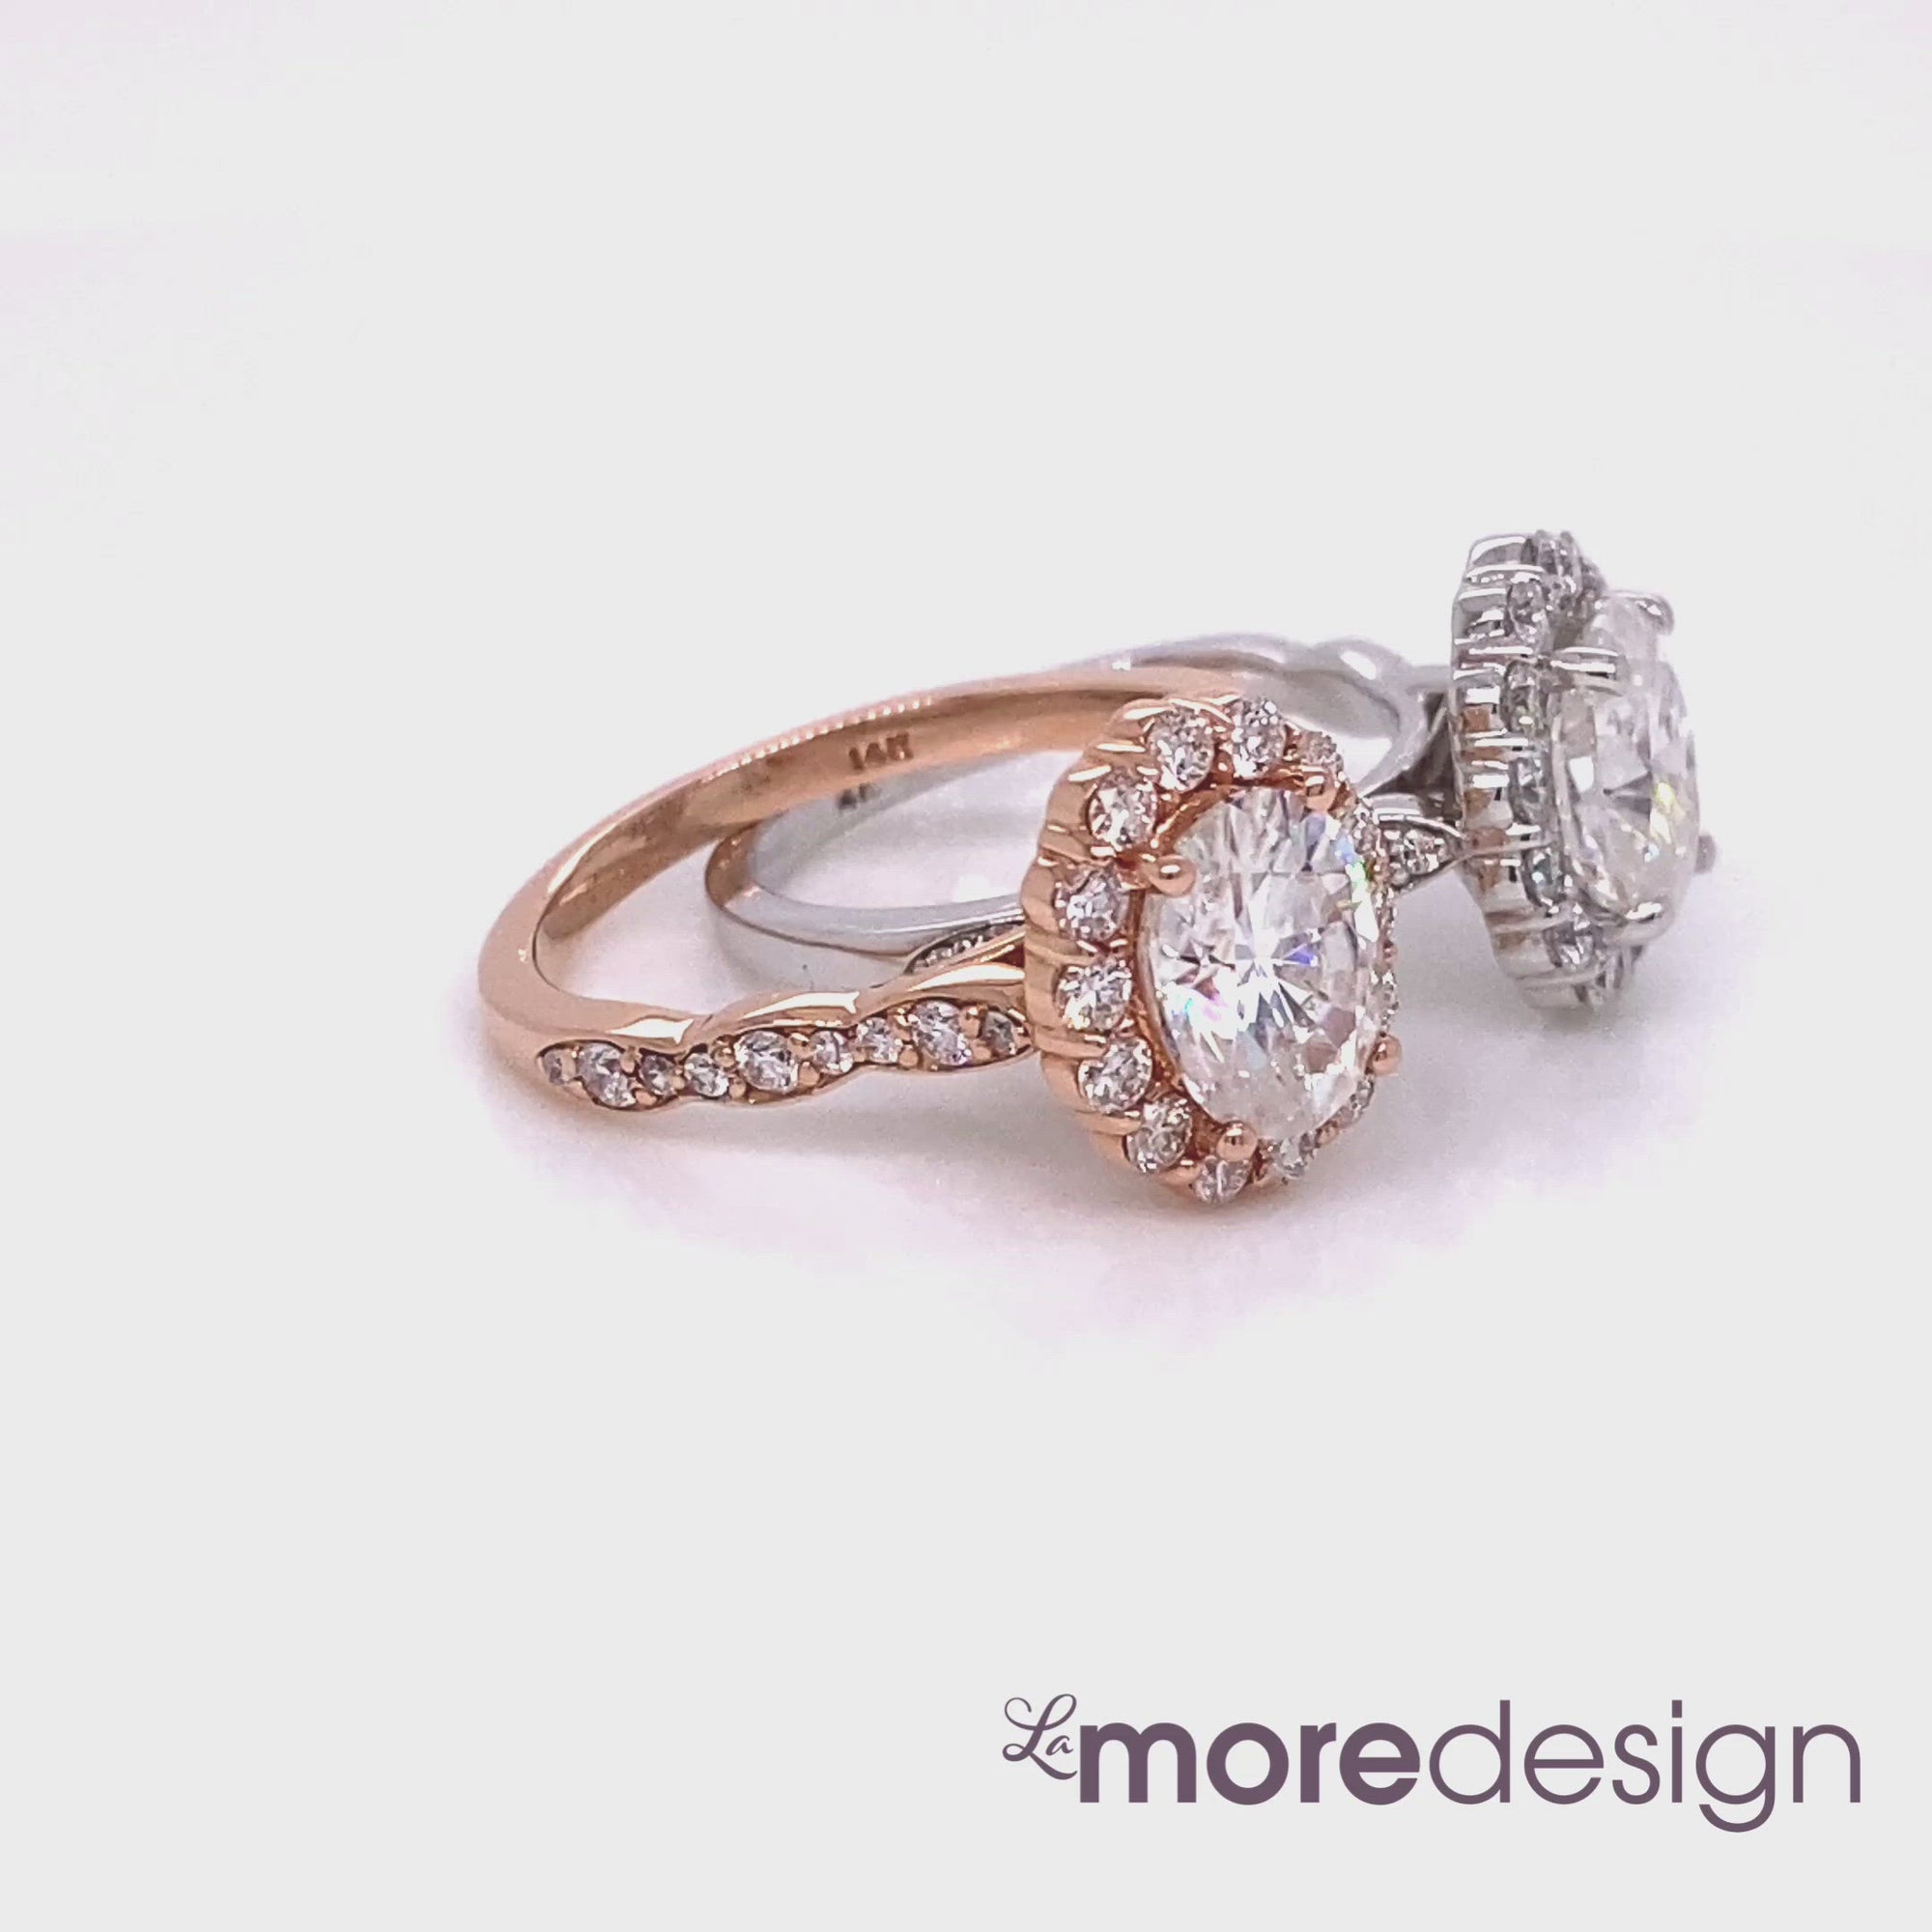 Vintage inspired halo diamond moissanite engagement ring features an 8x6mm oval cut Certified Charles & Collard Forever One Moissanite set in 14k rose gold and white gold scalloped diamond band. This exquisite engagement ring will guarantee a big smile on your future bride's face! It can be made in your choice of platinum or 18k or 14k yellow, rose or white gold. 